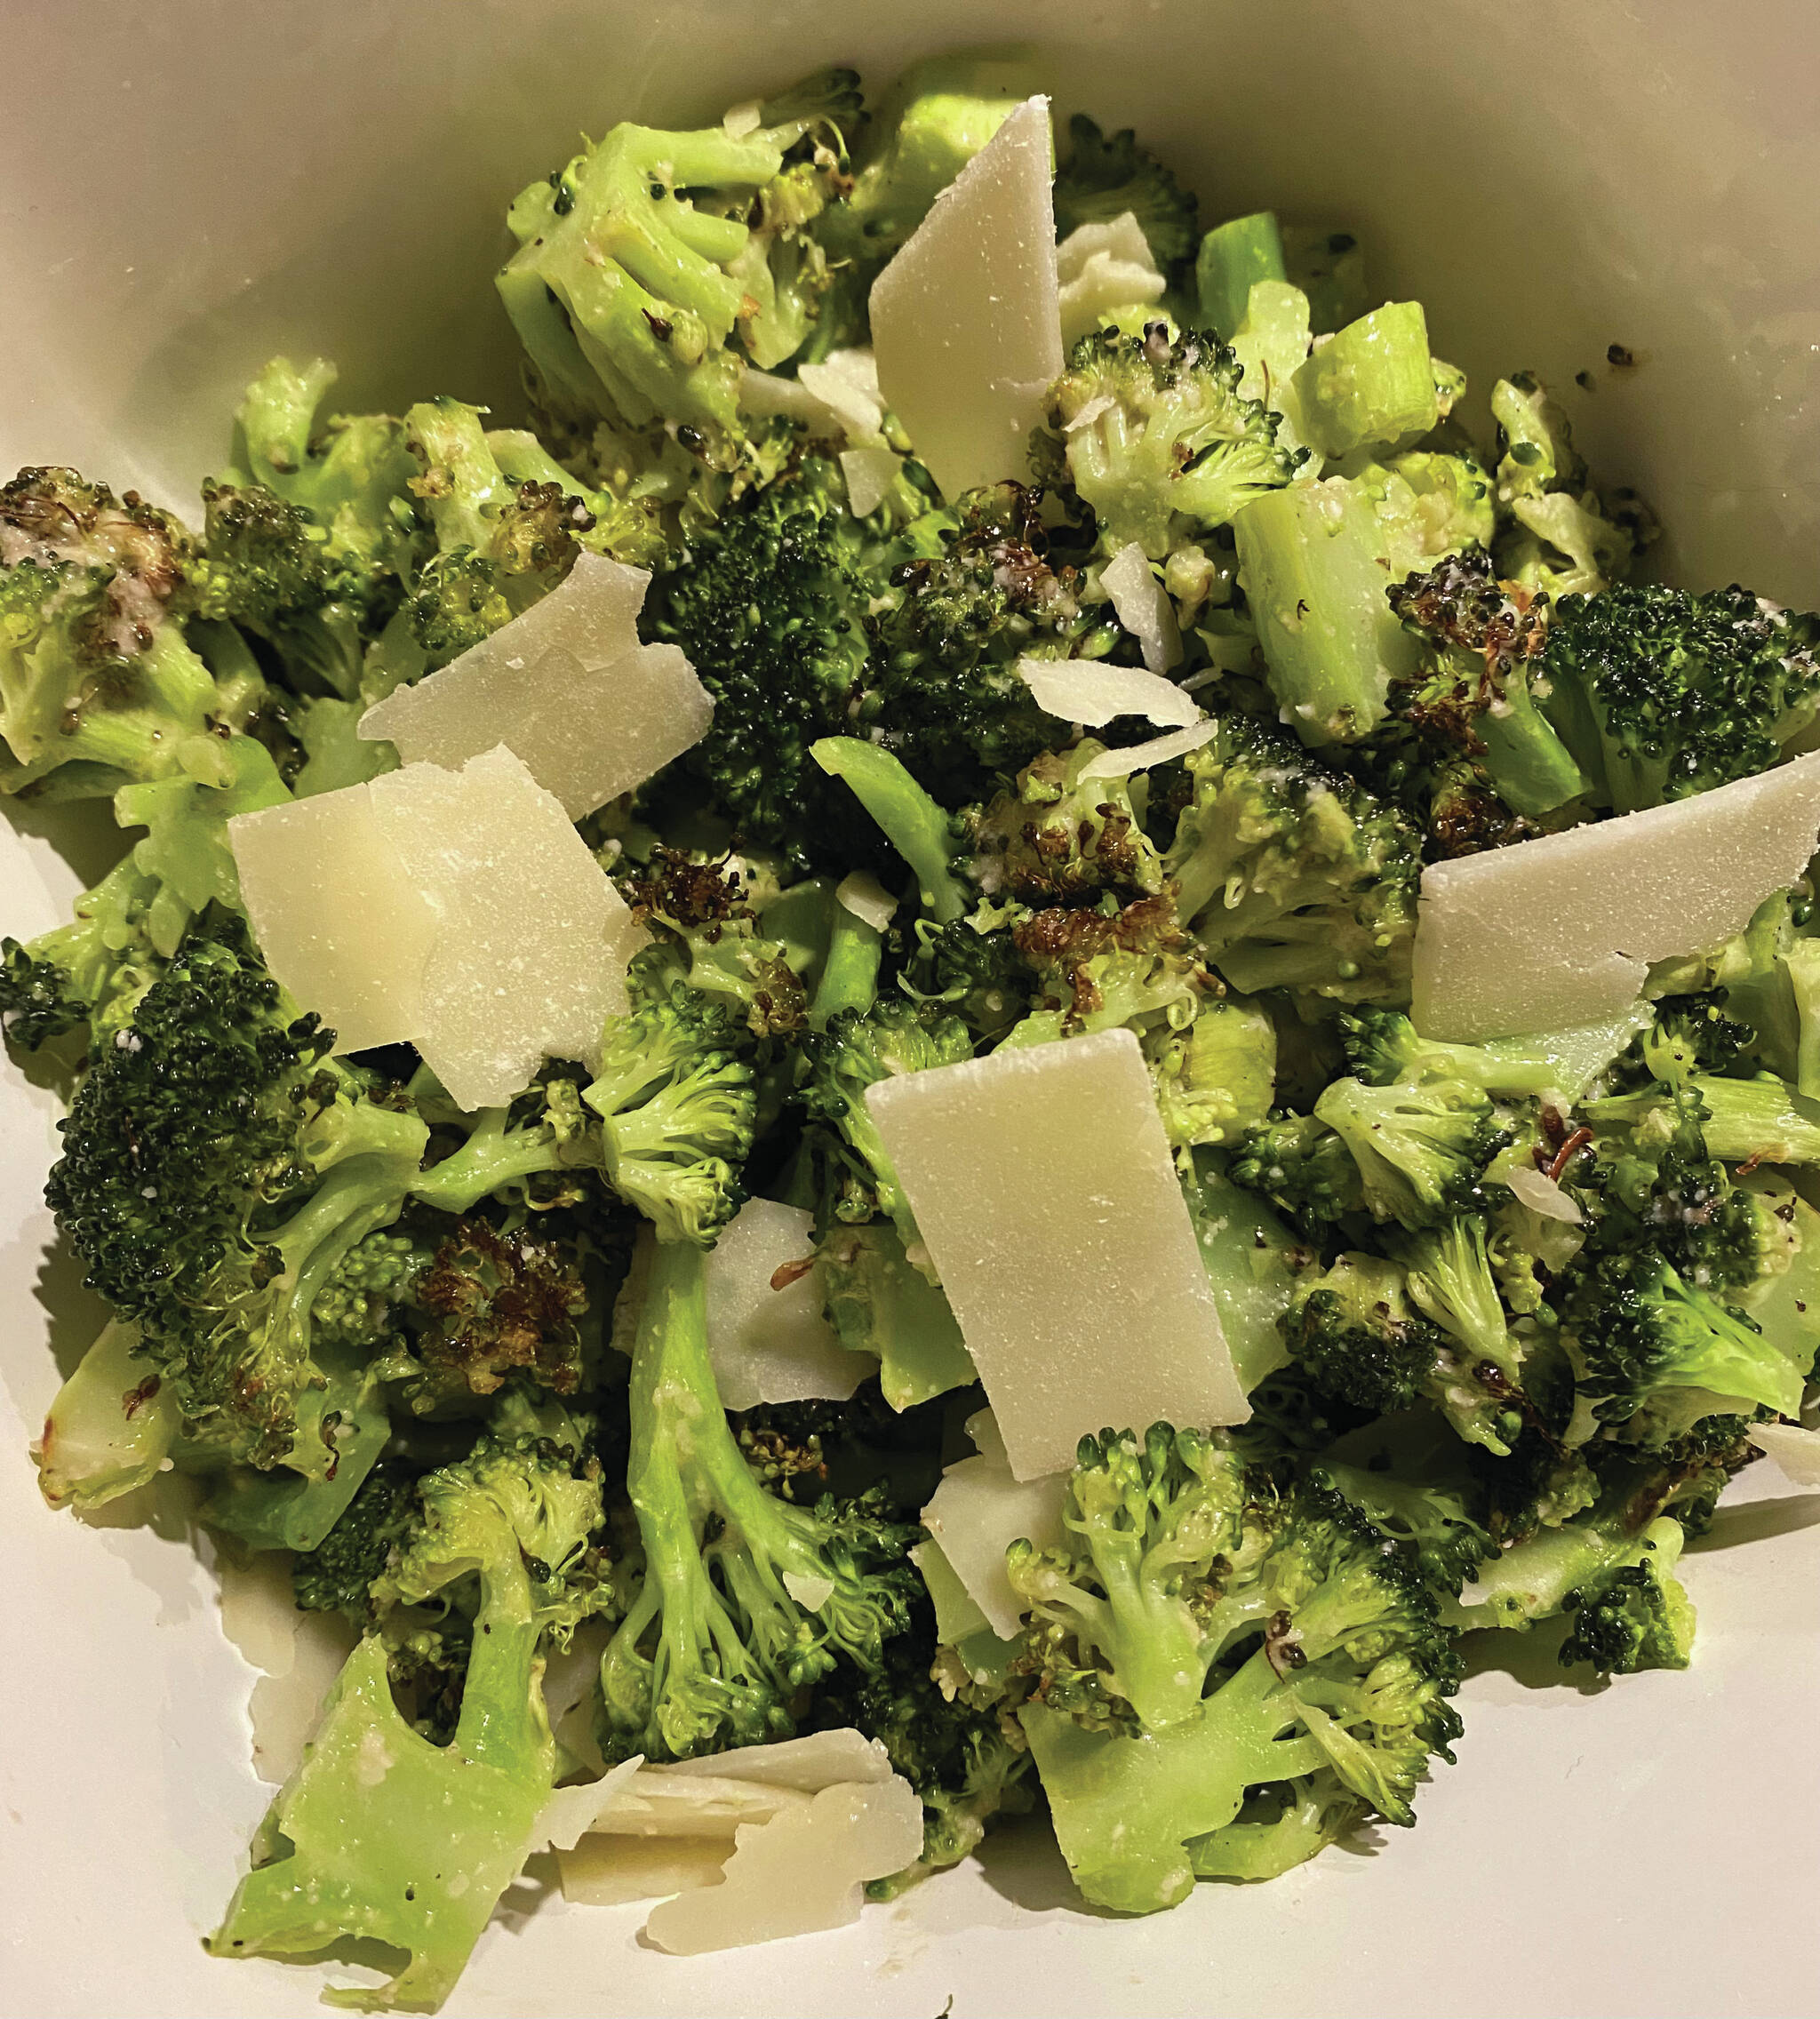 Photo by Tressa Dale/Peninsula Clarion
Roasted Broccoli Caesar Salad provides some much-needed greens and fiber to balance out the rolls and gravy.